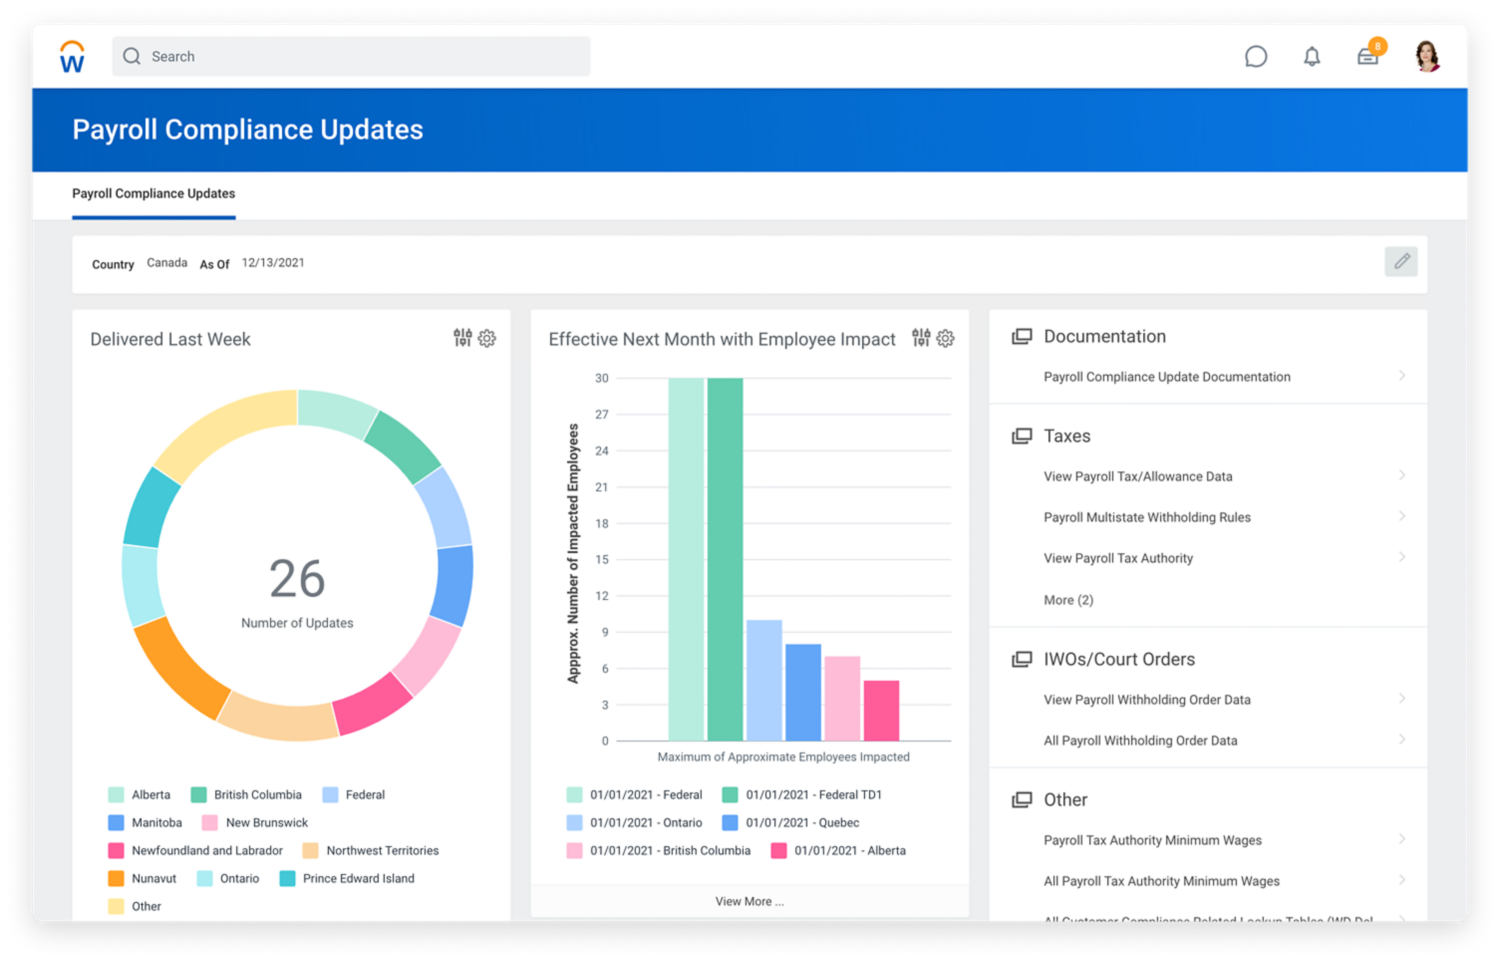 Payroll compliance update dashboard for Canada showing updates delivered last week and the number of employees impacted by updates next month.